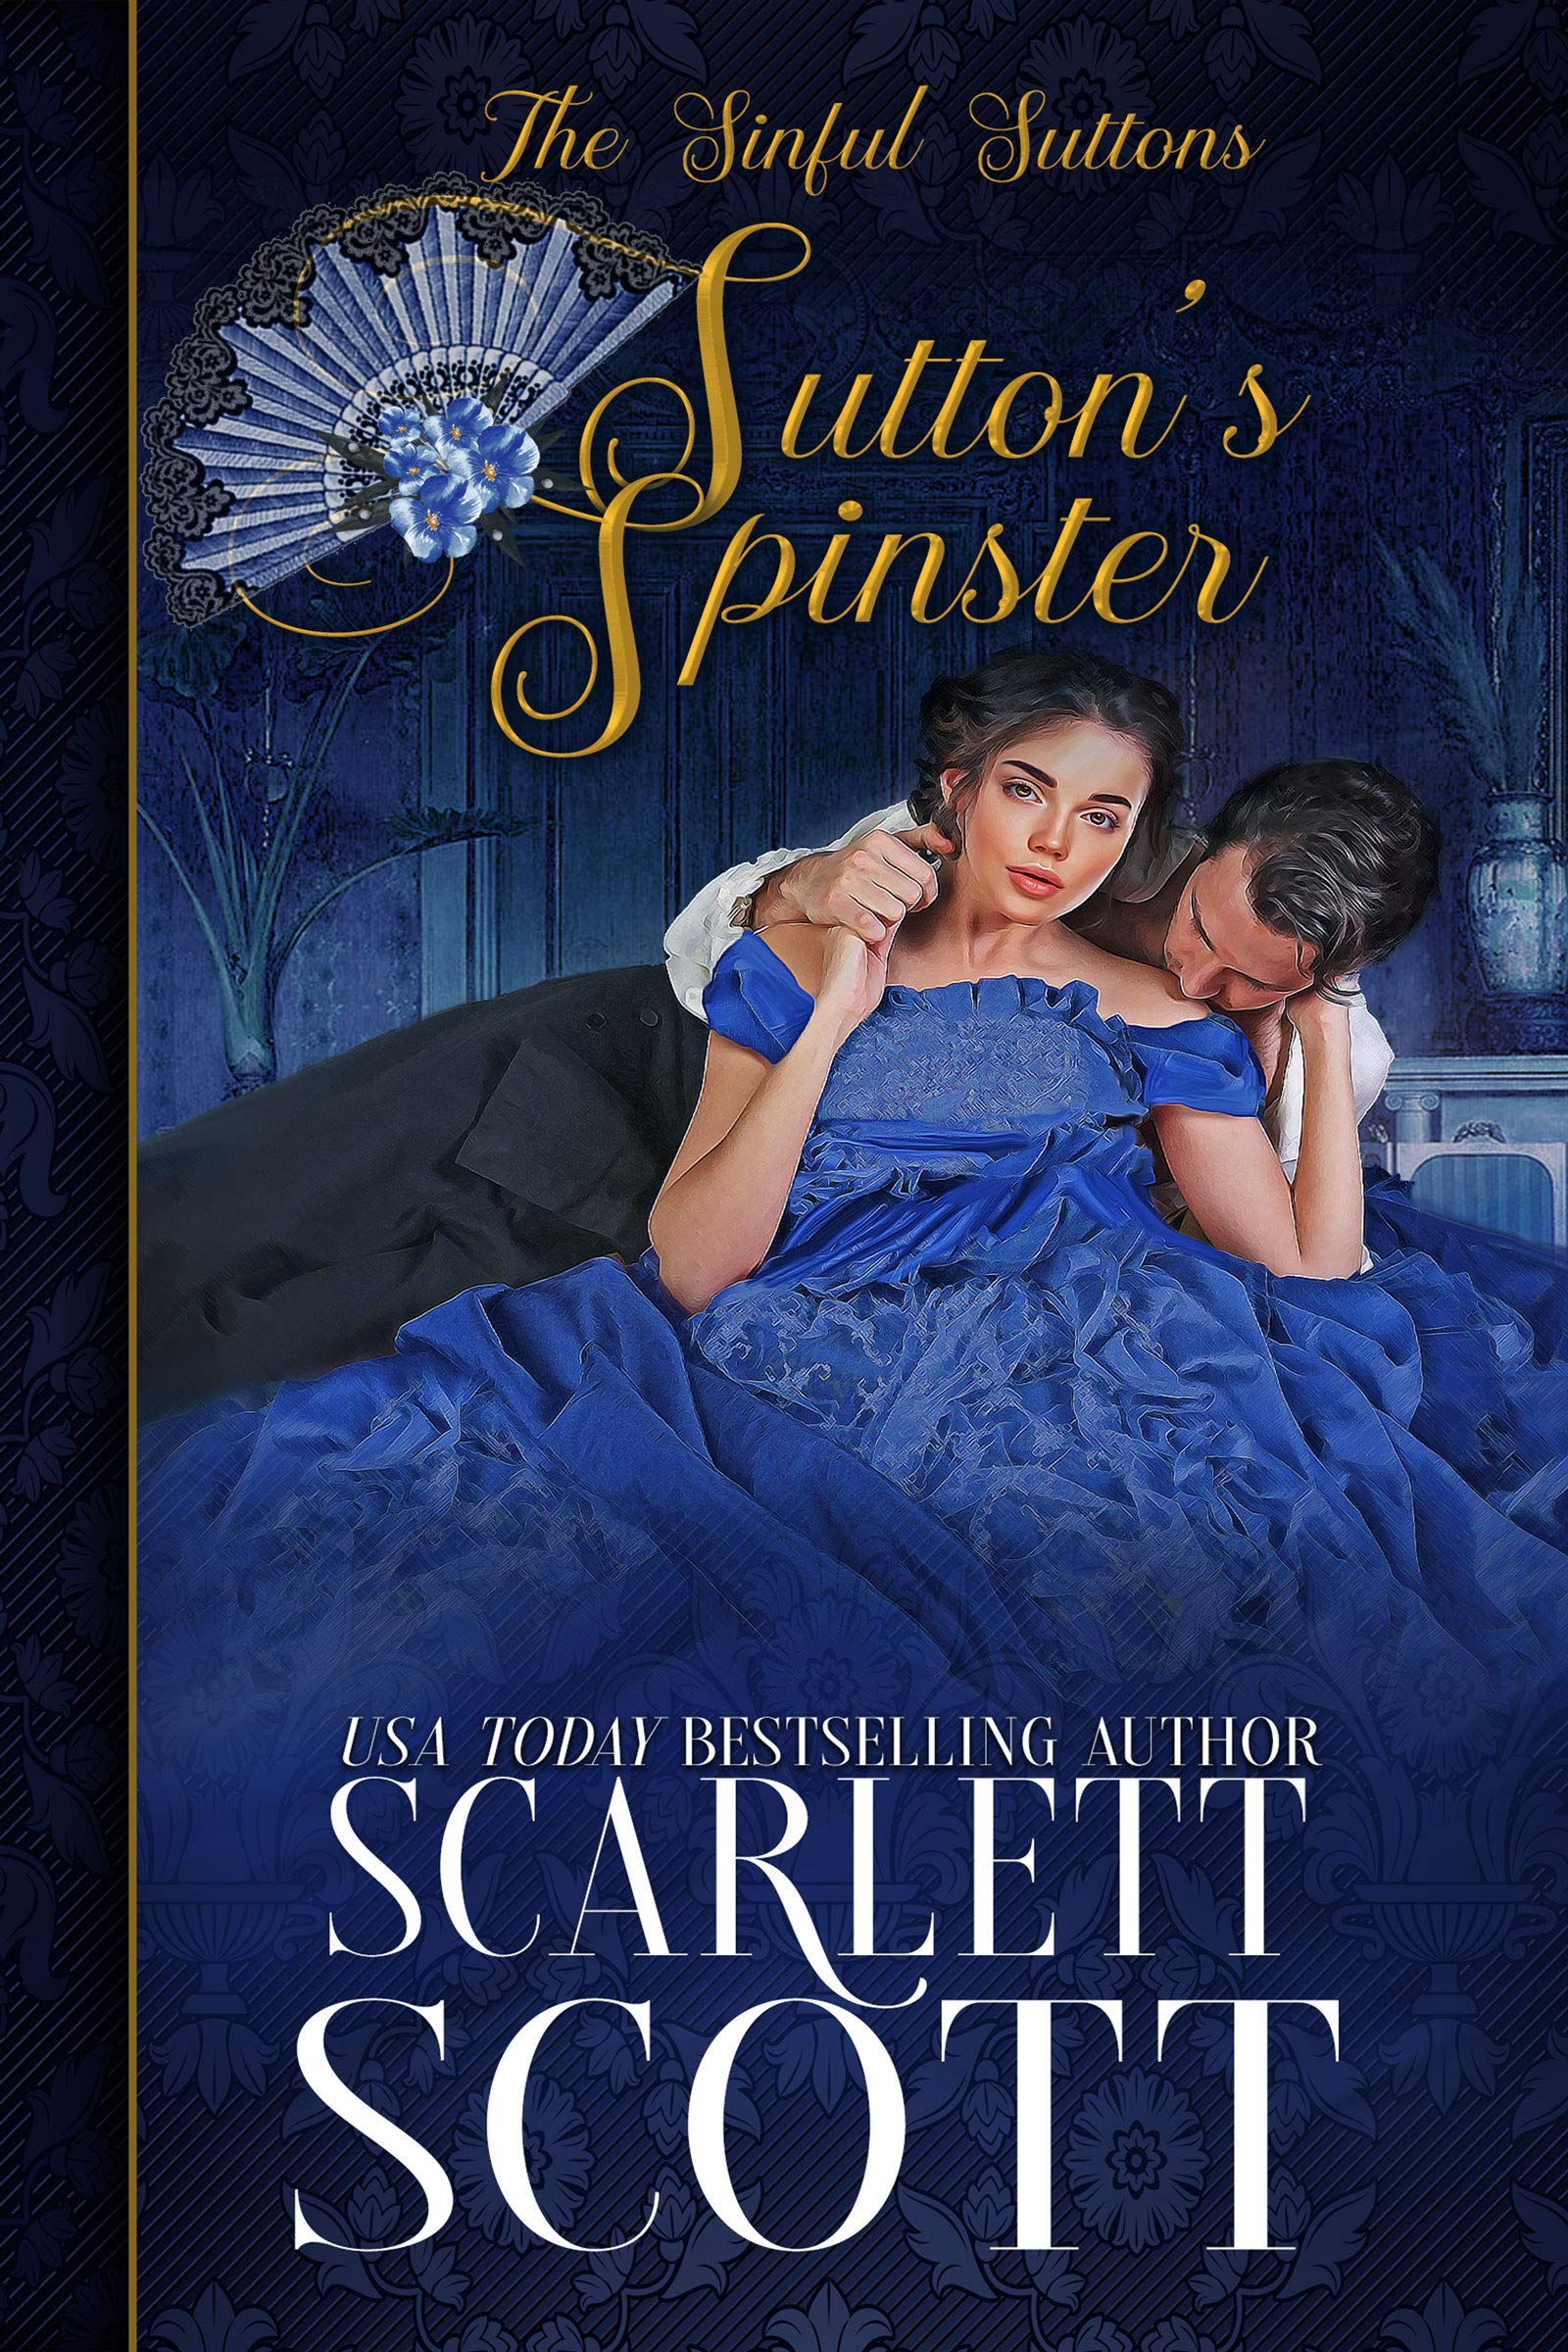 Sutton's Spinster: A Wicked Winters Spin-off Series (The Sinful Suttons Book 1)